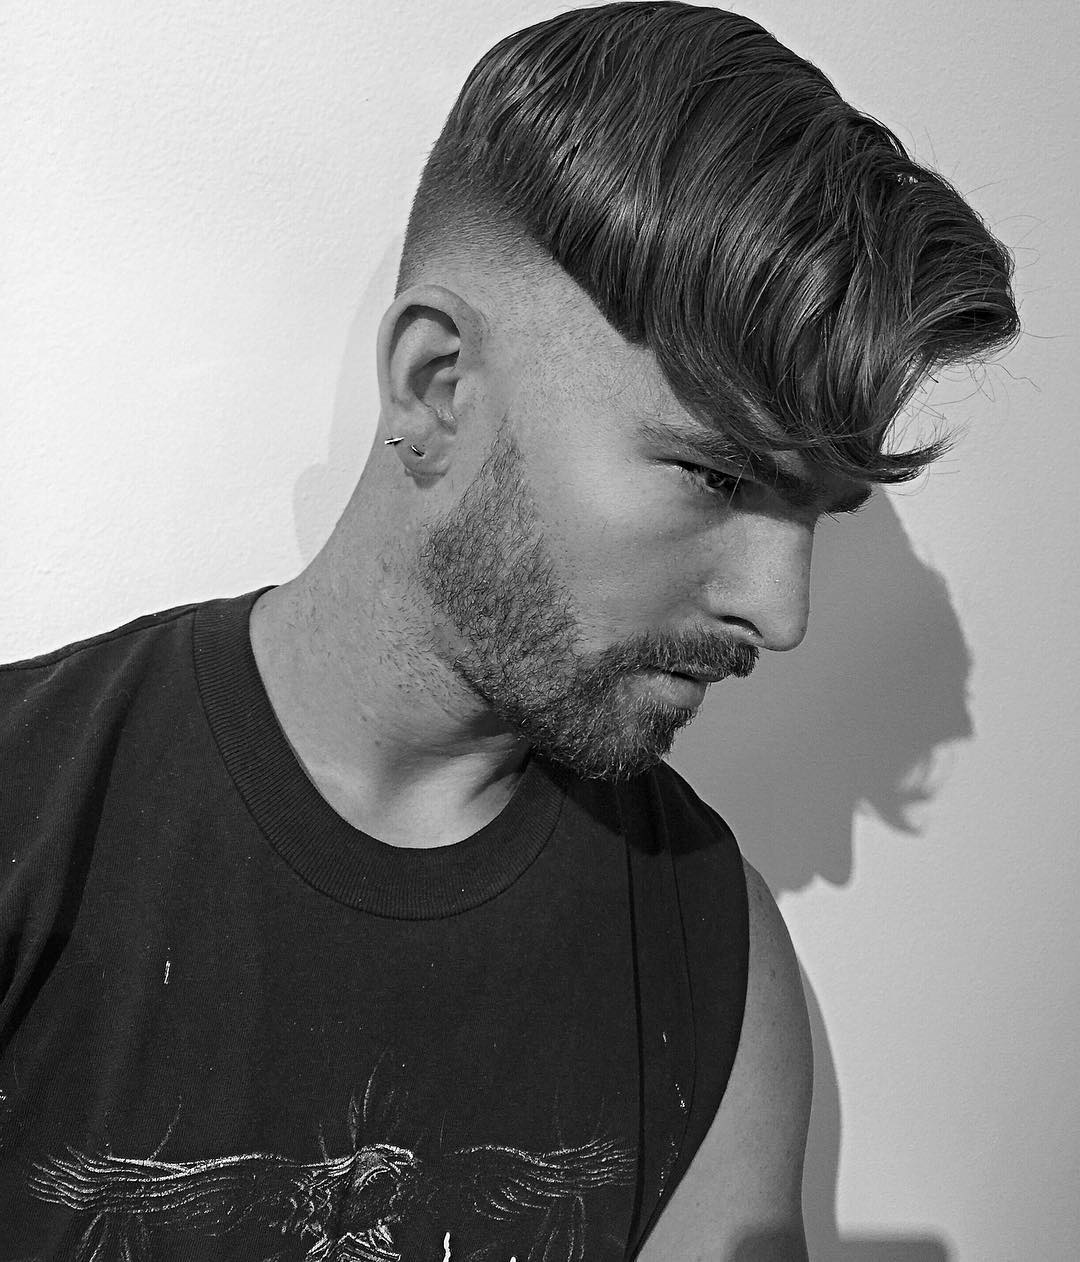 A undercut with thick wavy hair looks neat on top and bold thanks to the fade